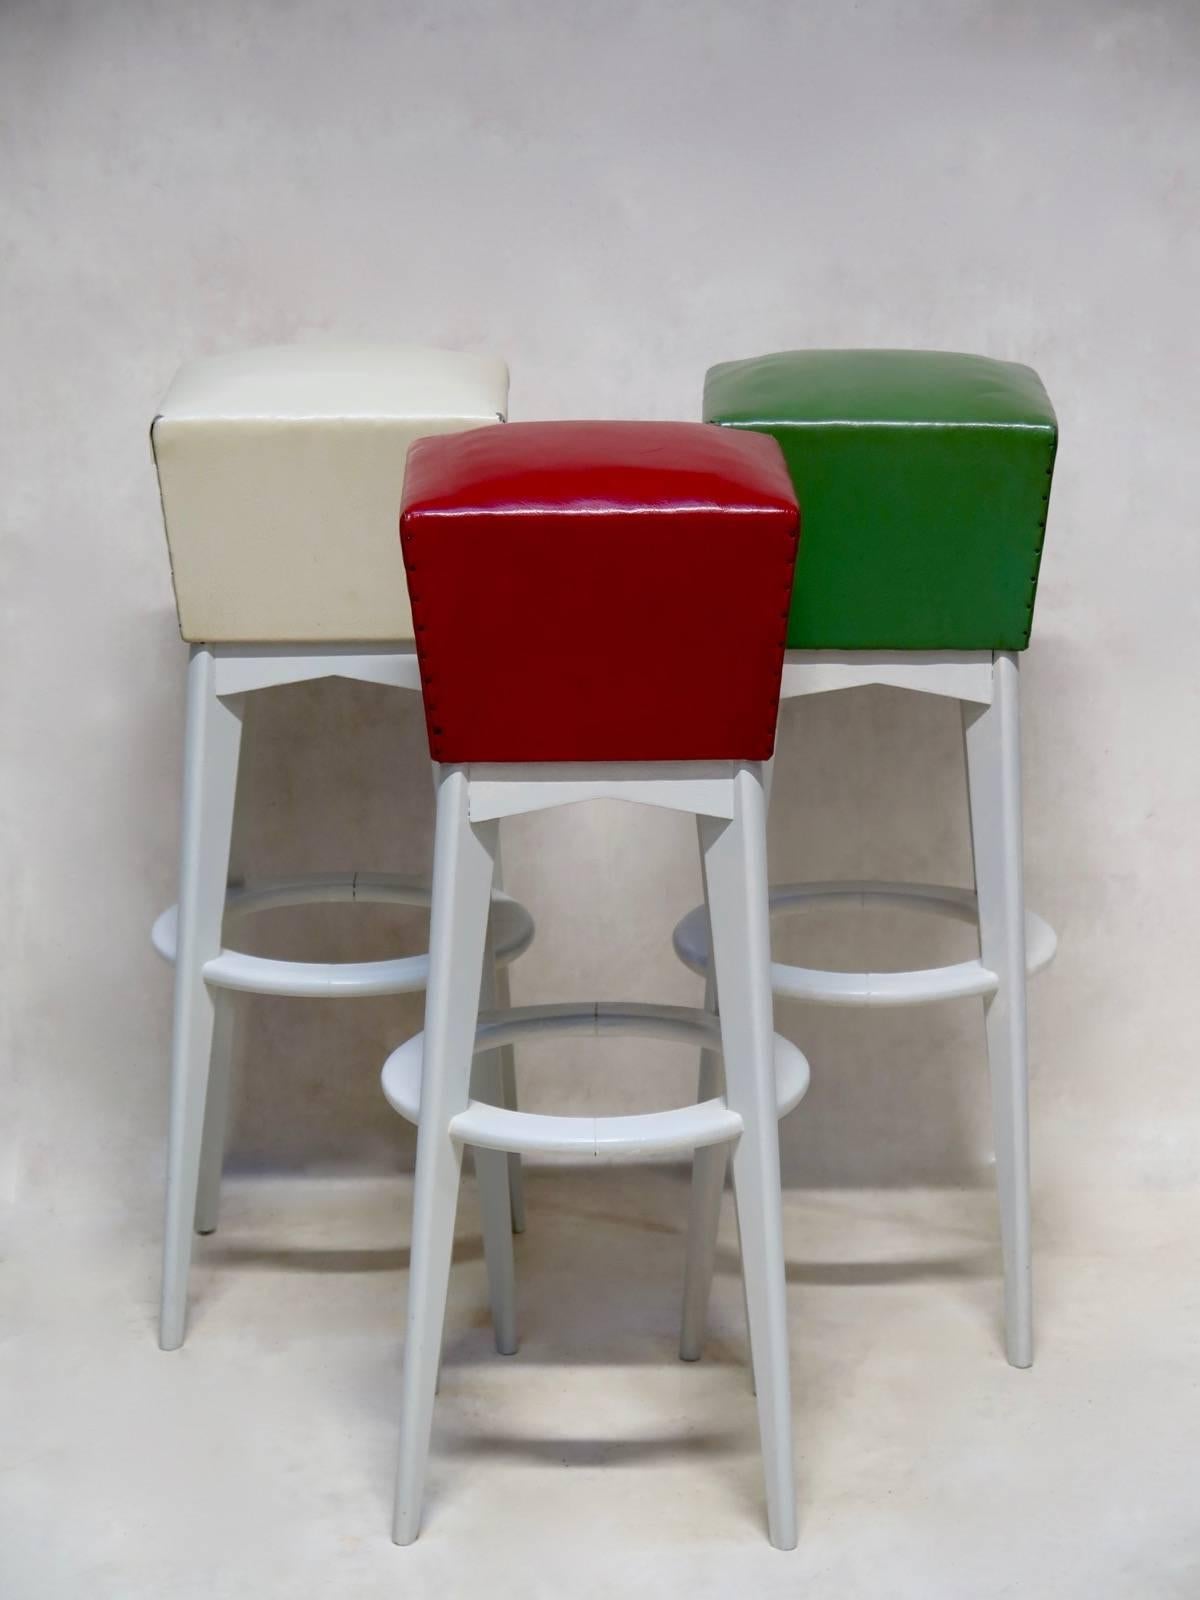 Chic and fun set of six mid-20th century bar stools. The seats are covered in the original red, green and cream-colored vinyl, leatherette-type upholstery. They are raised on slender, tapering and splayed legs, joined by a circular stretcher or